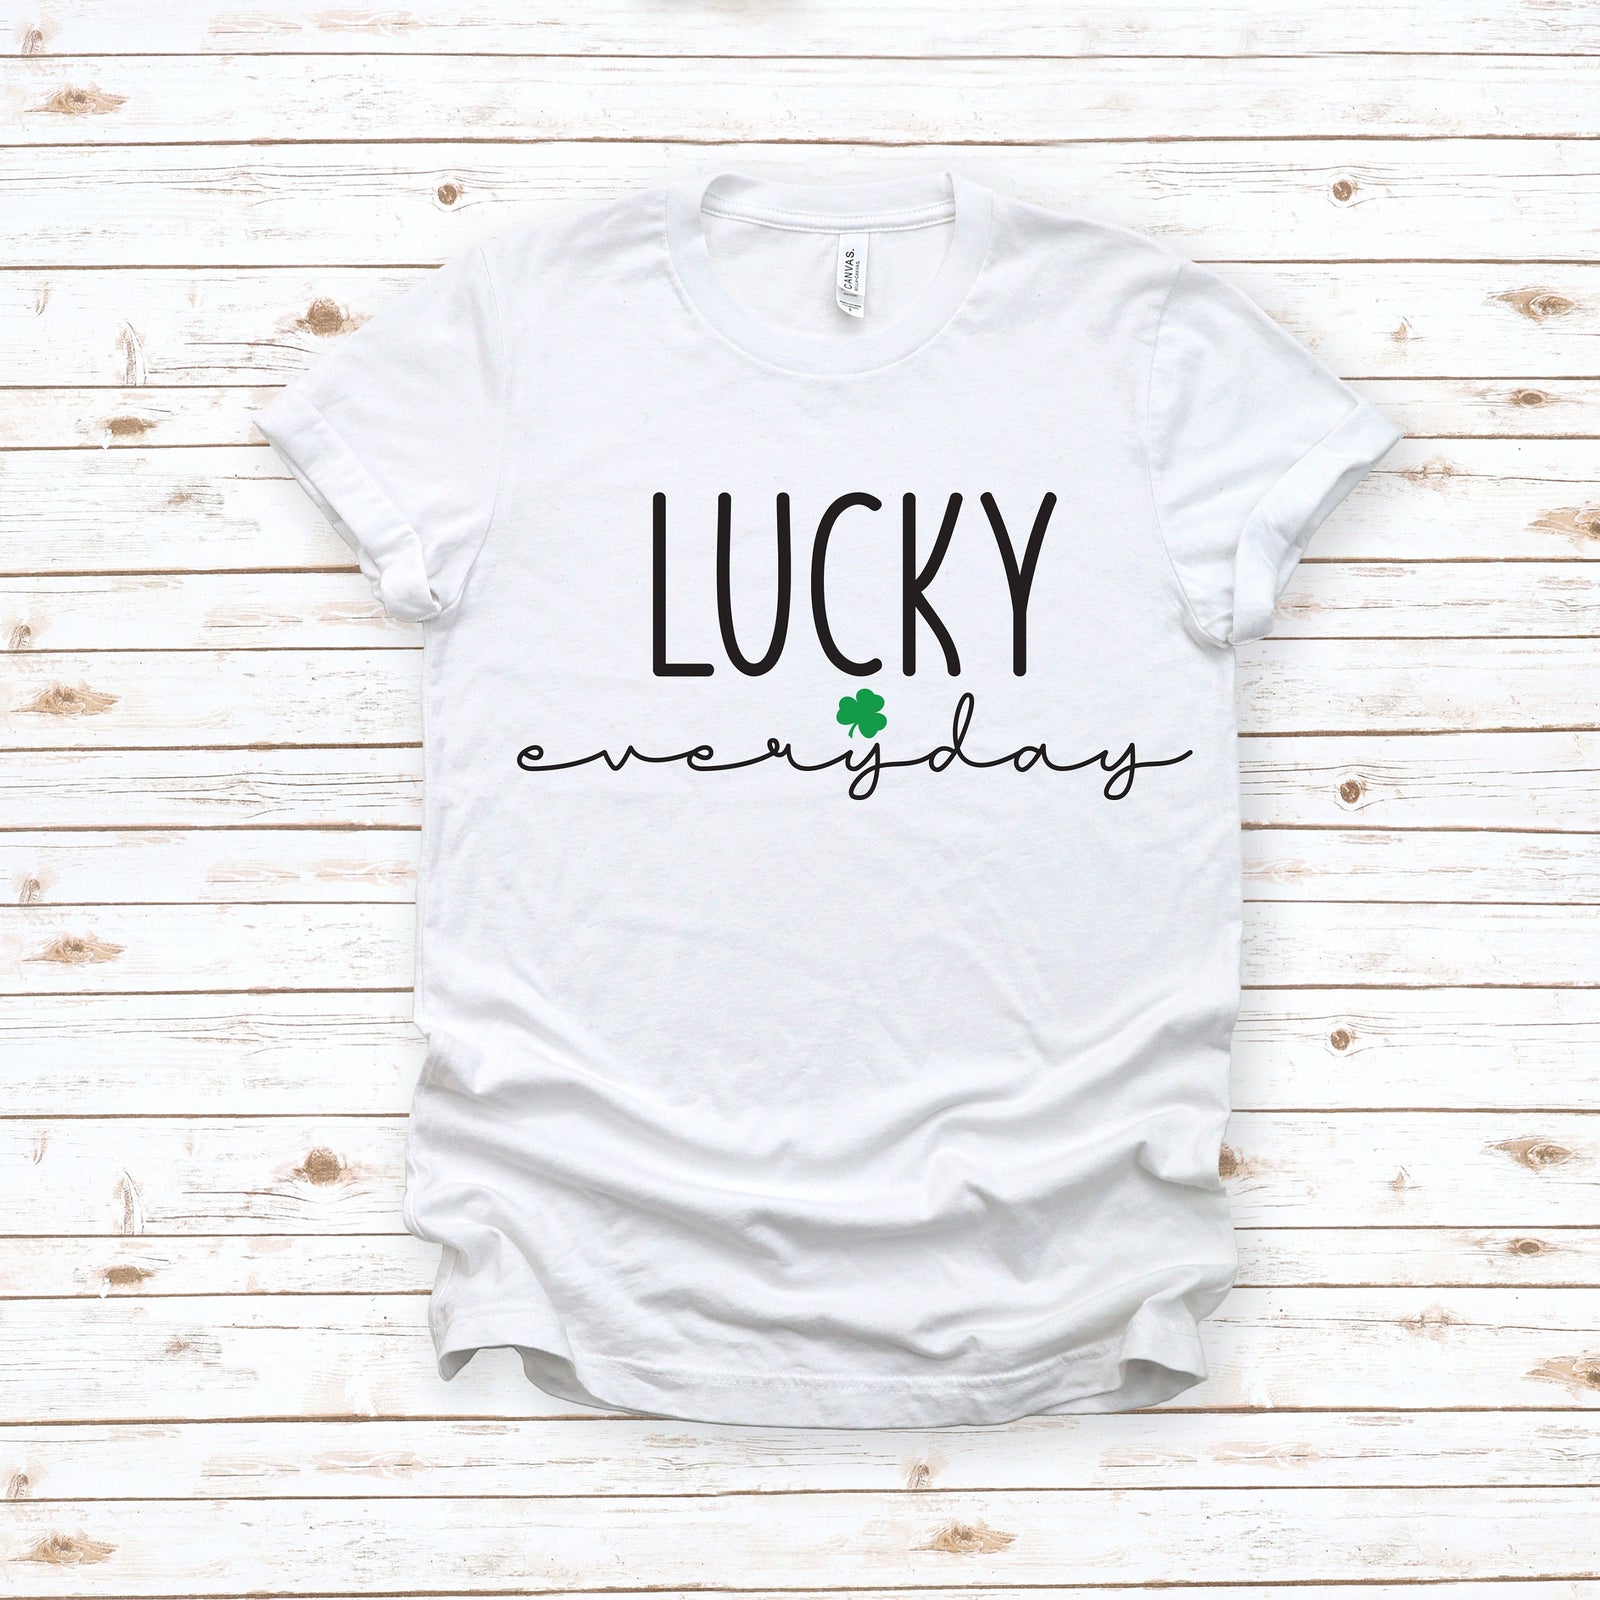 Lucky Everyday Adult Unisex T Shirt - St. Patrick's Day Shirt - Blessed